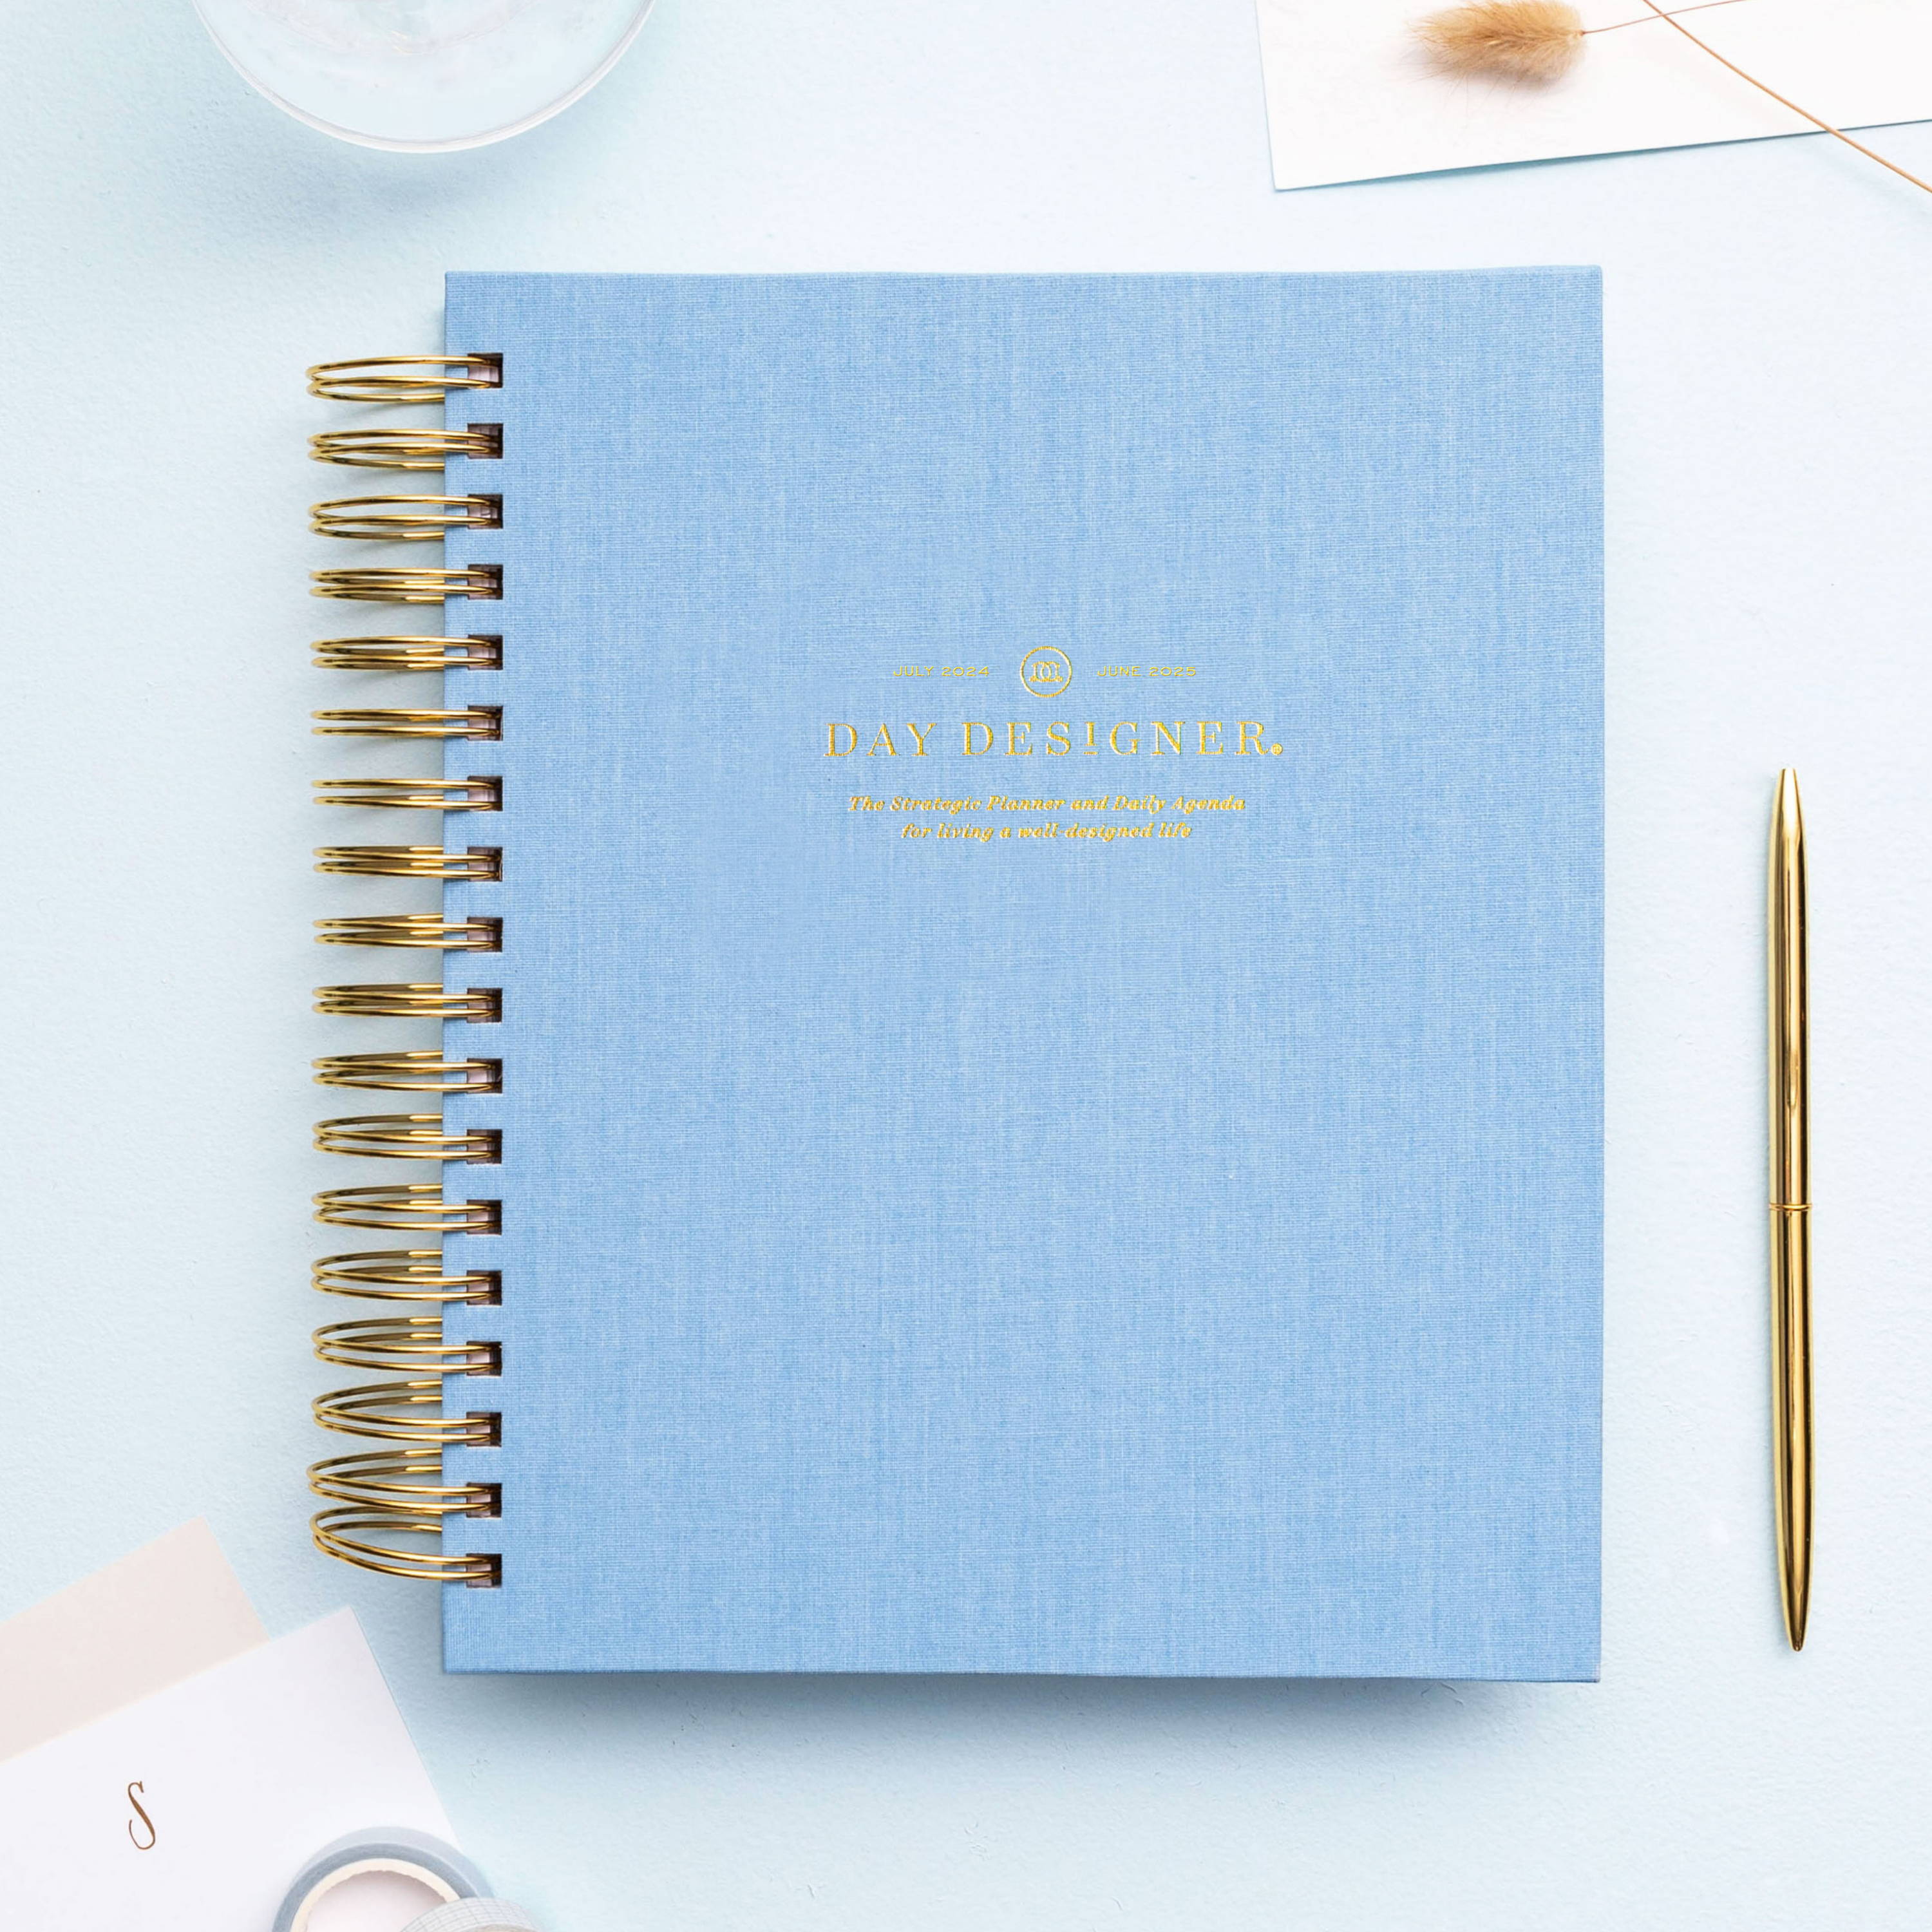 light blue closed book bookcloth planner on light blue background, gold pen, stationery, dried flower